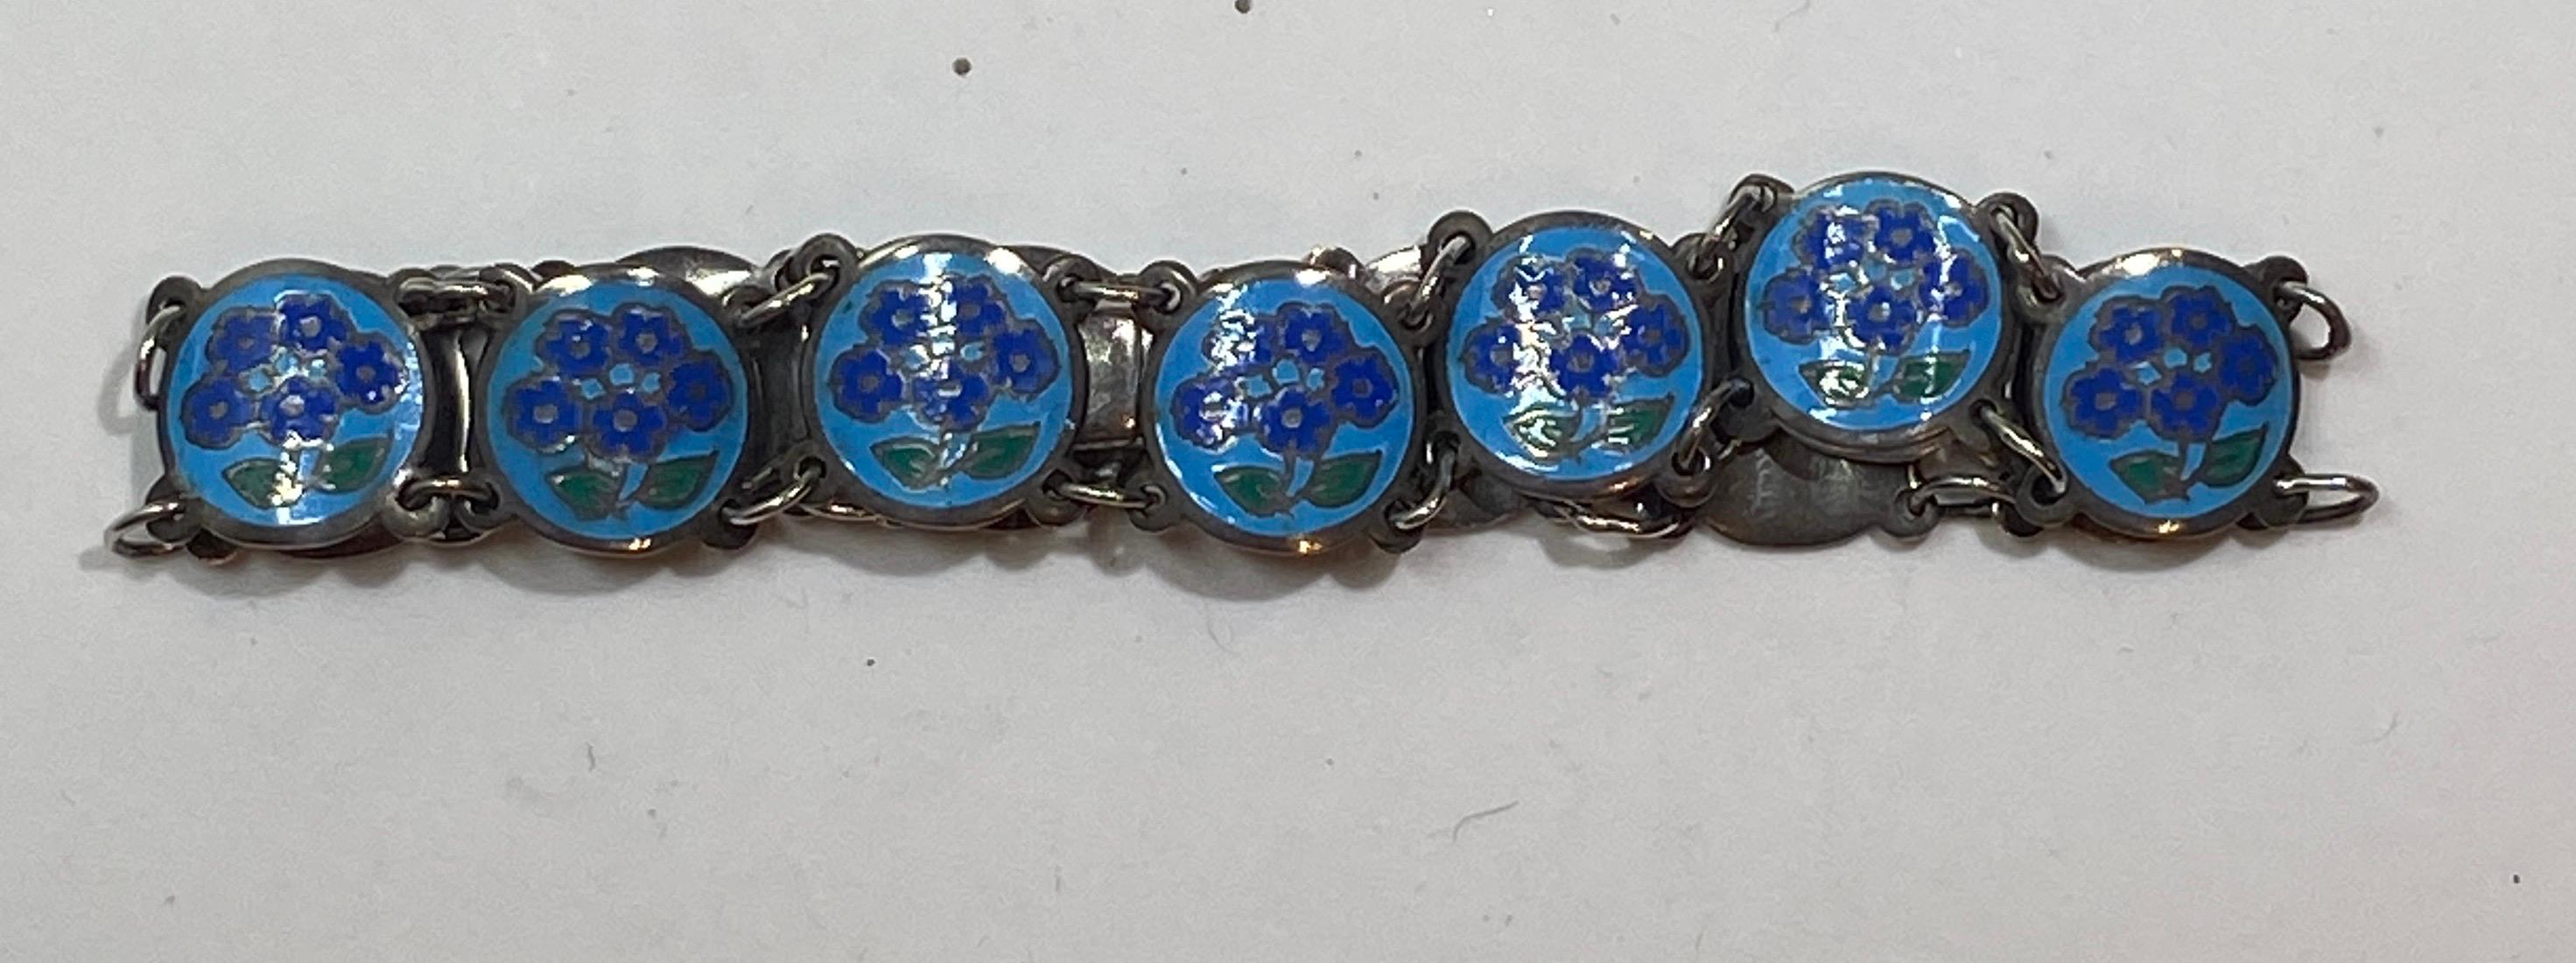 This delicate sterling silver link bracelet is detailed with multi-color floral enamel in shades of blues and greens. The length measures 6 1/2 inches. Width is 3/8 inch. On the opening clasp is etched with maker's mark. Made in Thailand.